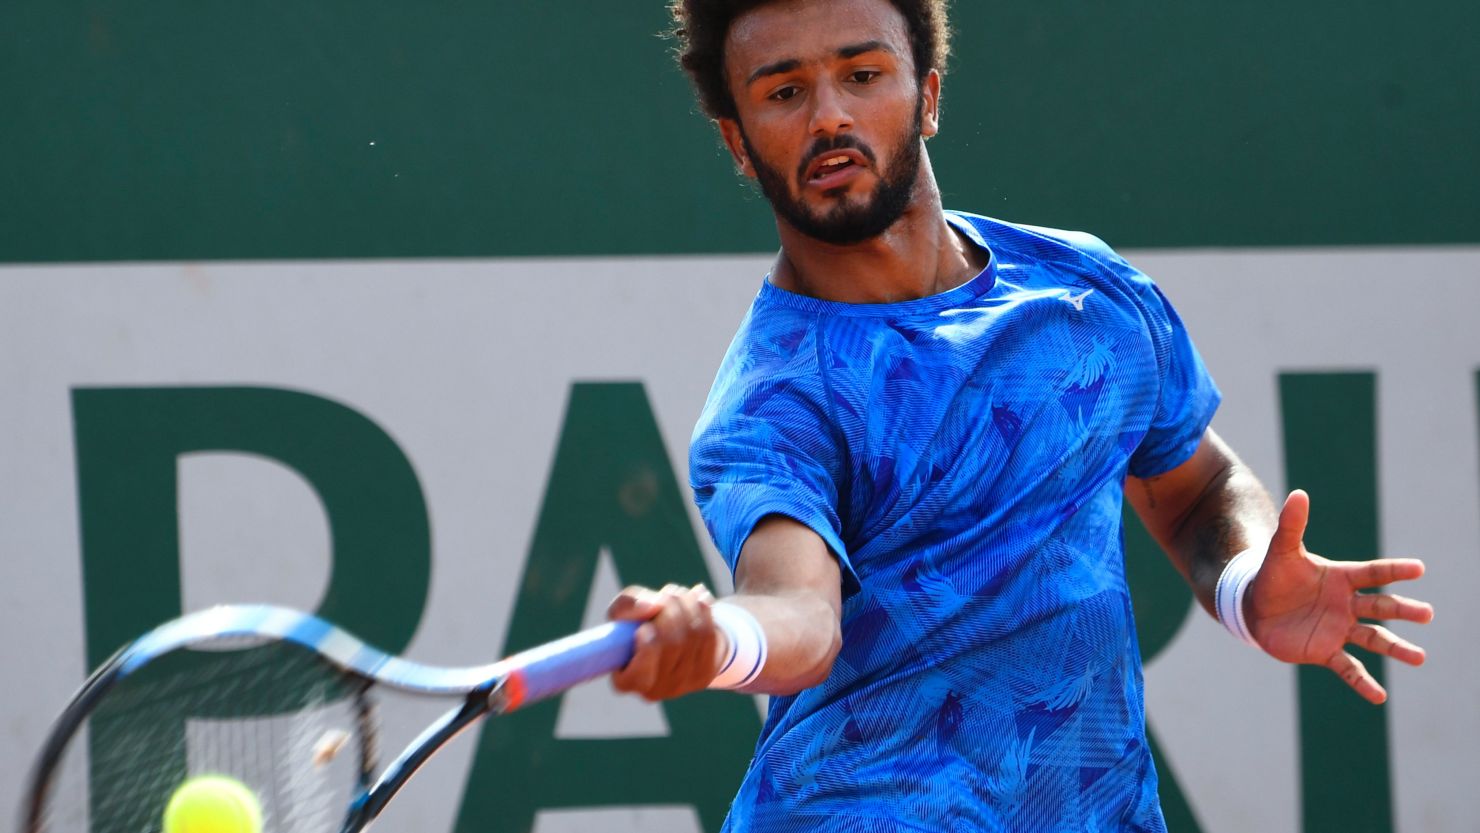 France's Maxime Hamou lost in straight sets to Uruguay's Pablo Cuevas.